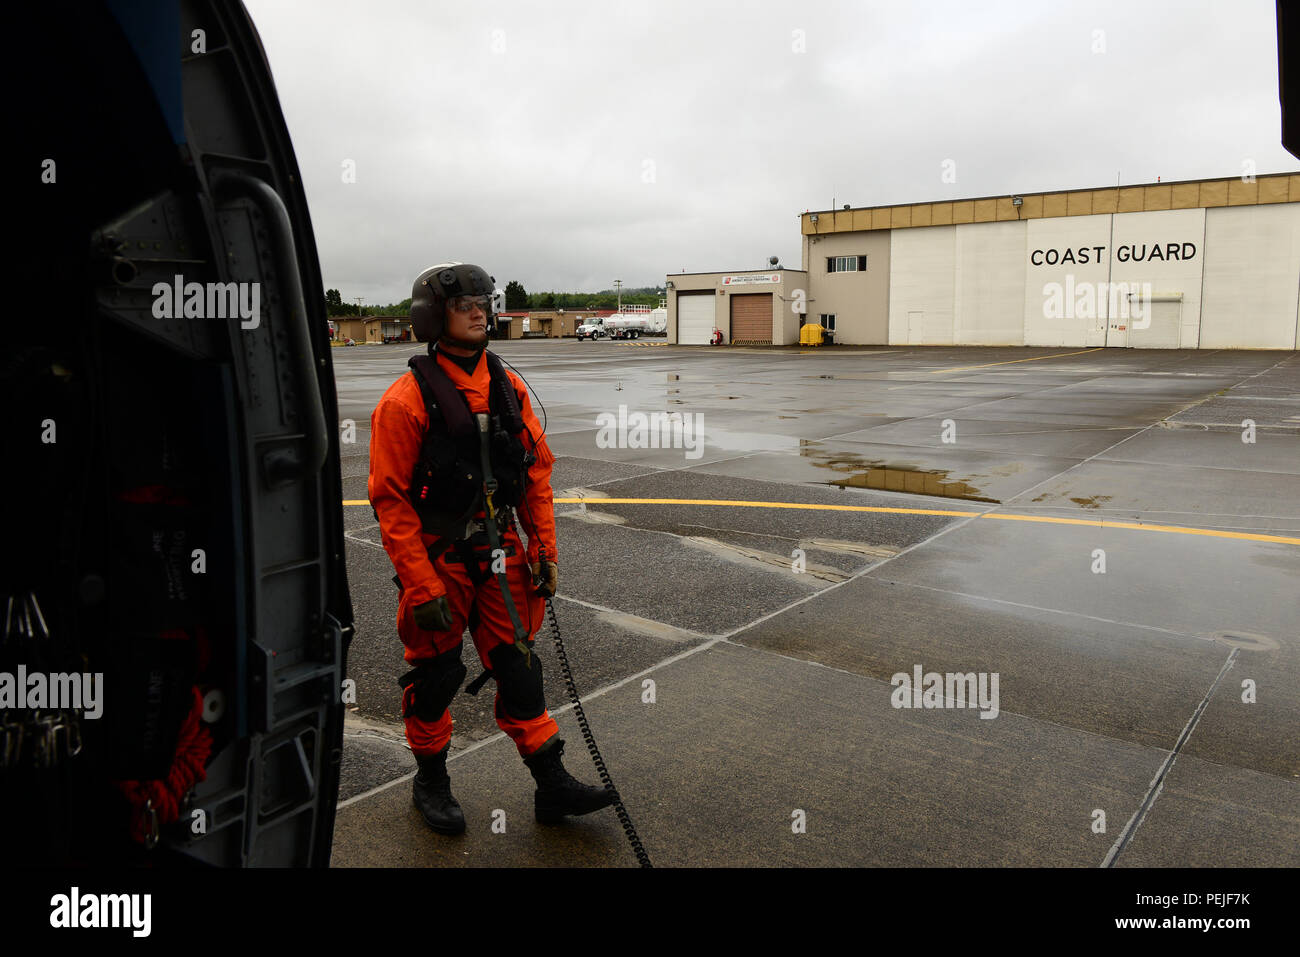 Petty Officer 2nd Class James Rizer, an aviation electronics technician and qualified flight mechanic, prepares to conduct final aircraft checks prior to take off from Coast Guard Air Station Astoria, Ore., Aug. 28, 2015. This flight was headed to the San Juan Islands in the Puget Sound to assist with an aids-to-navigation mission. (U.S. Coast Guard photo by Petty Officer 1st Class Levi Read) Stock Photo